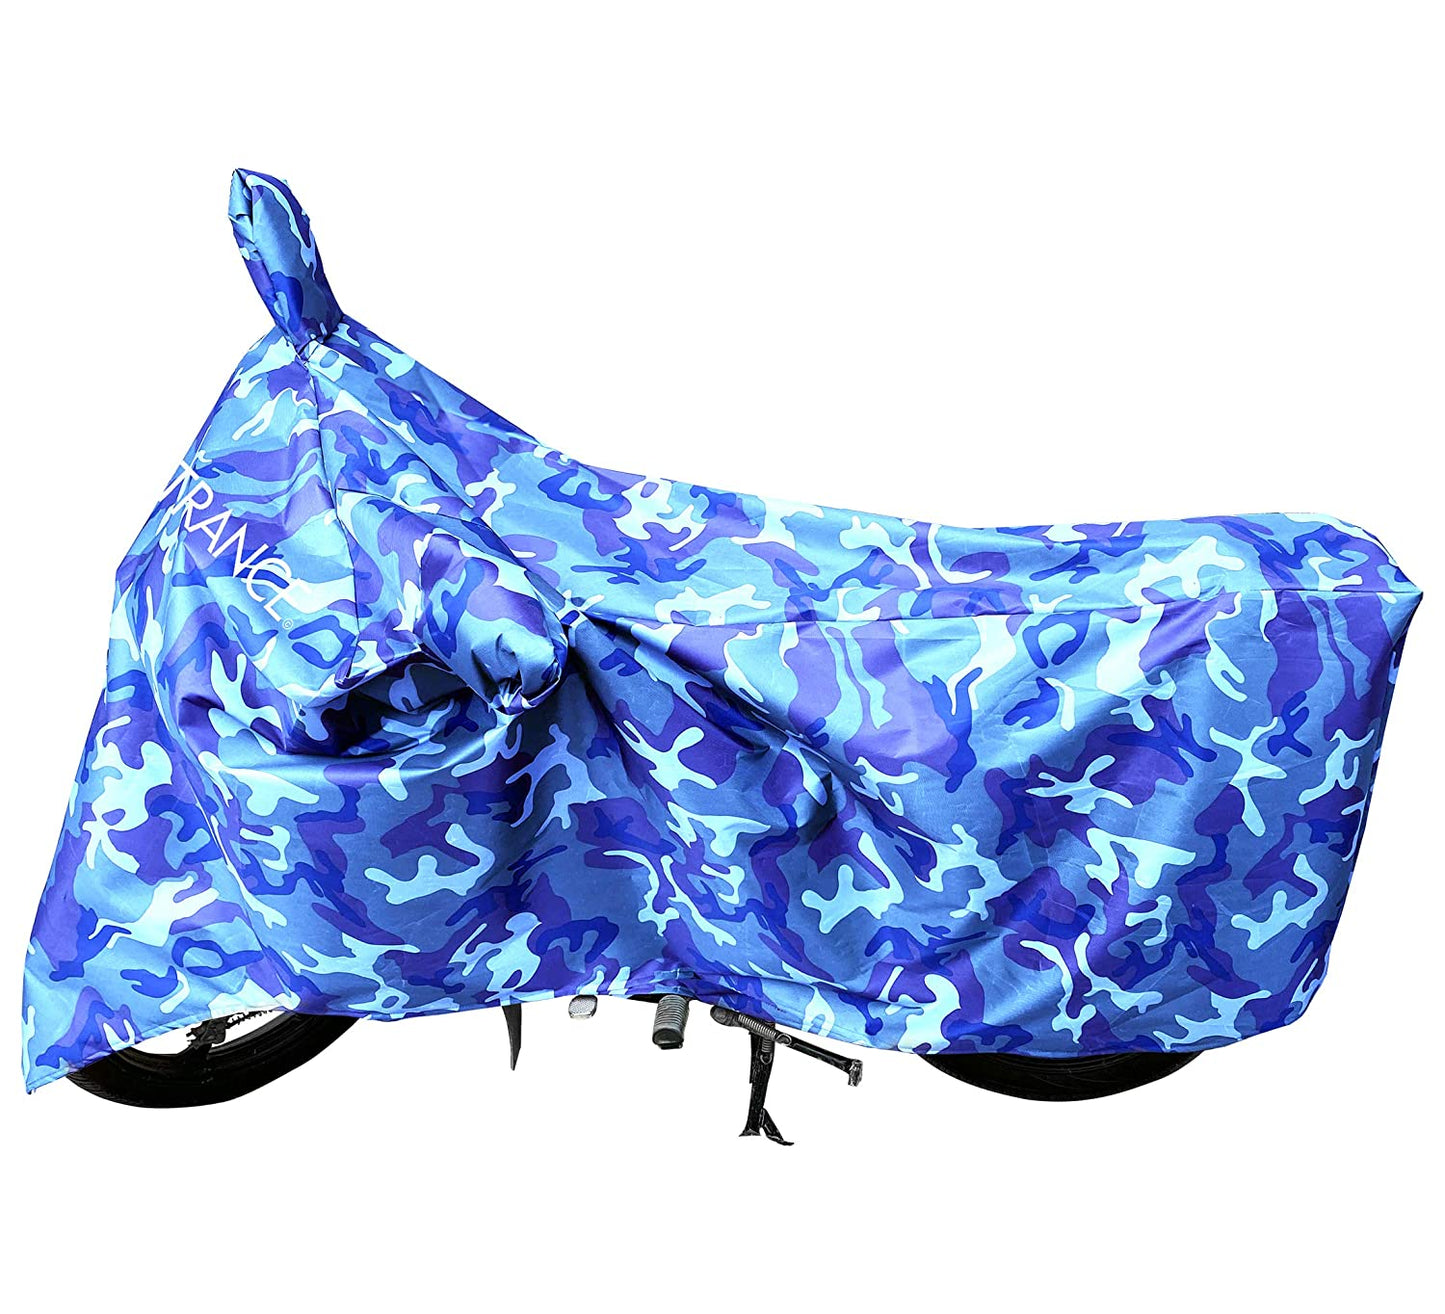 MotoTrance Jungle Bike Body Covers For BajajÂ  CT110 2019 - Interlock-Stitched Waterproof and Heat Resistant with Mirror Pockets